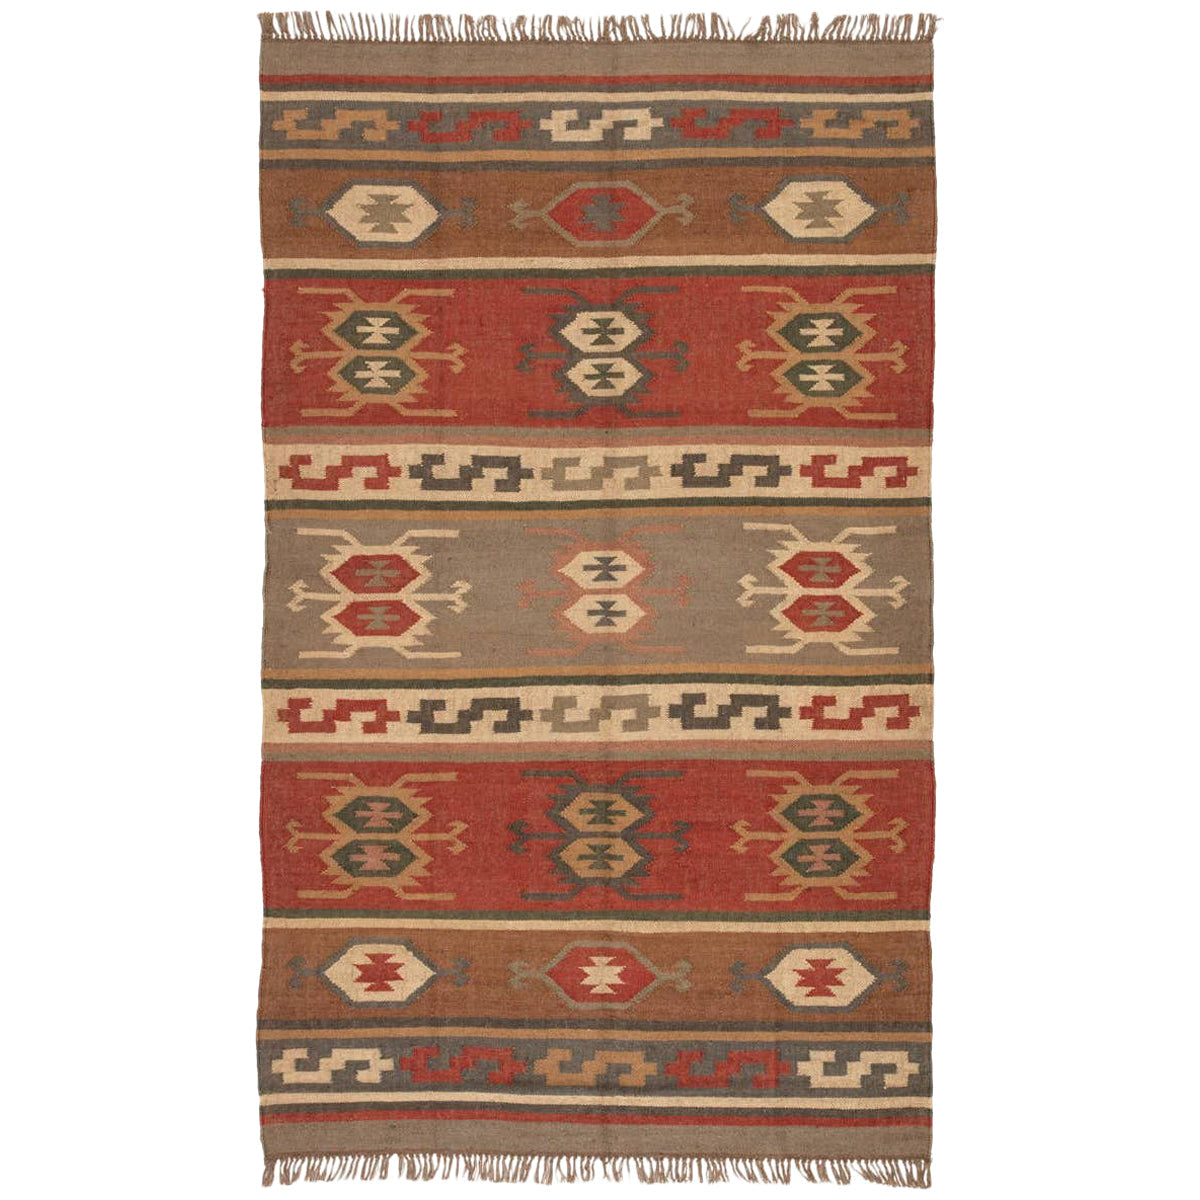 Jaipur Bedouin Thebes BD01 Rug